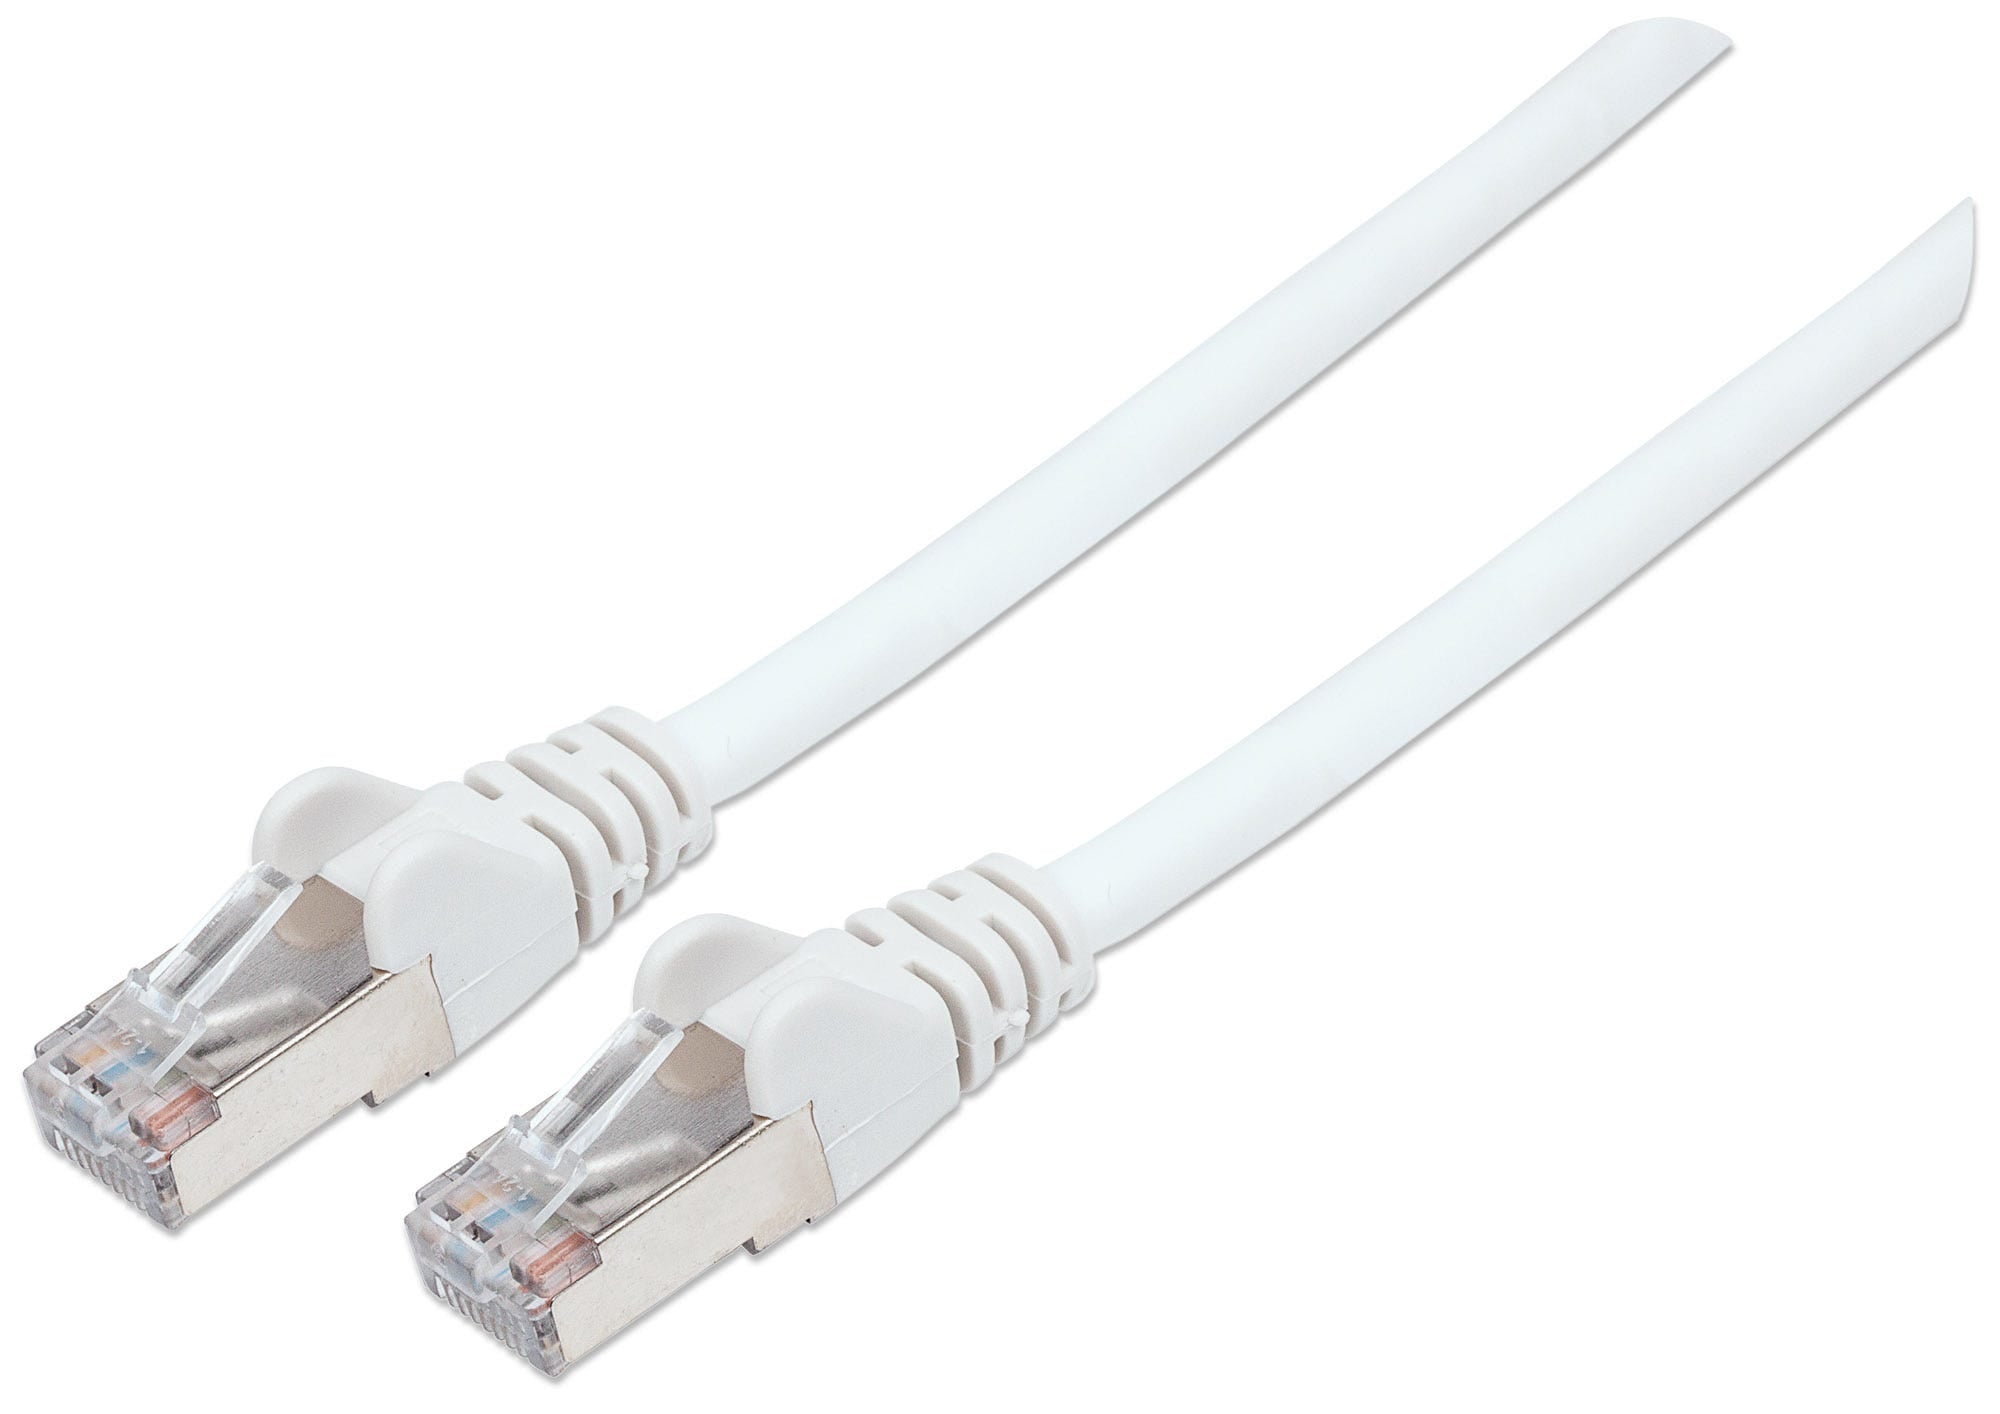 Intellinet Network Patch Cable, Cat6, 3m, White, Copper, S/FTP, LSOH / LSZH, PVC, RJ45, Gold Plated Contacts, Snagless, Booted, Lifetime Warranty, Polybag